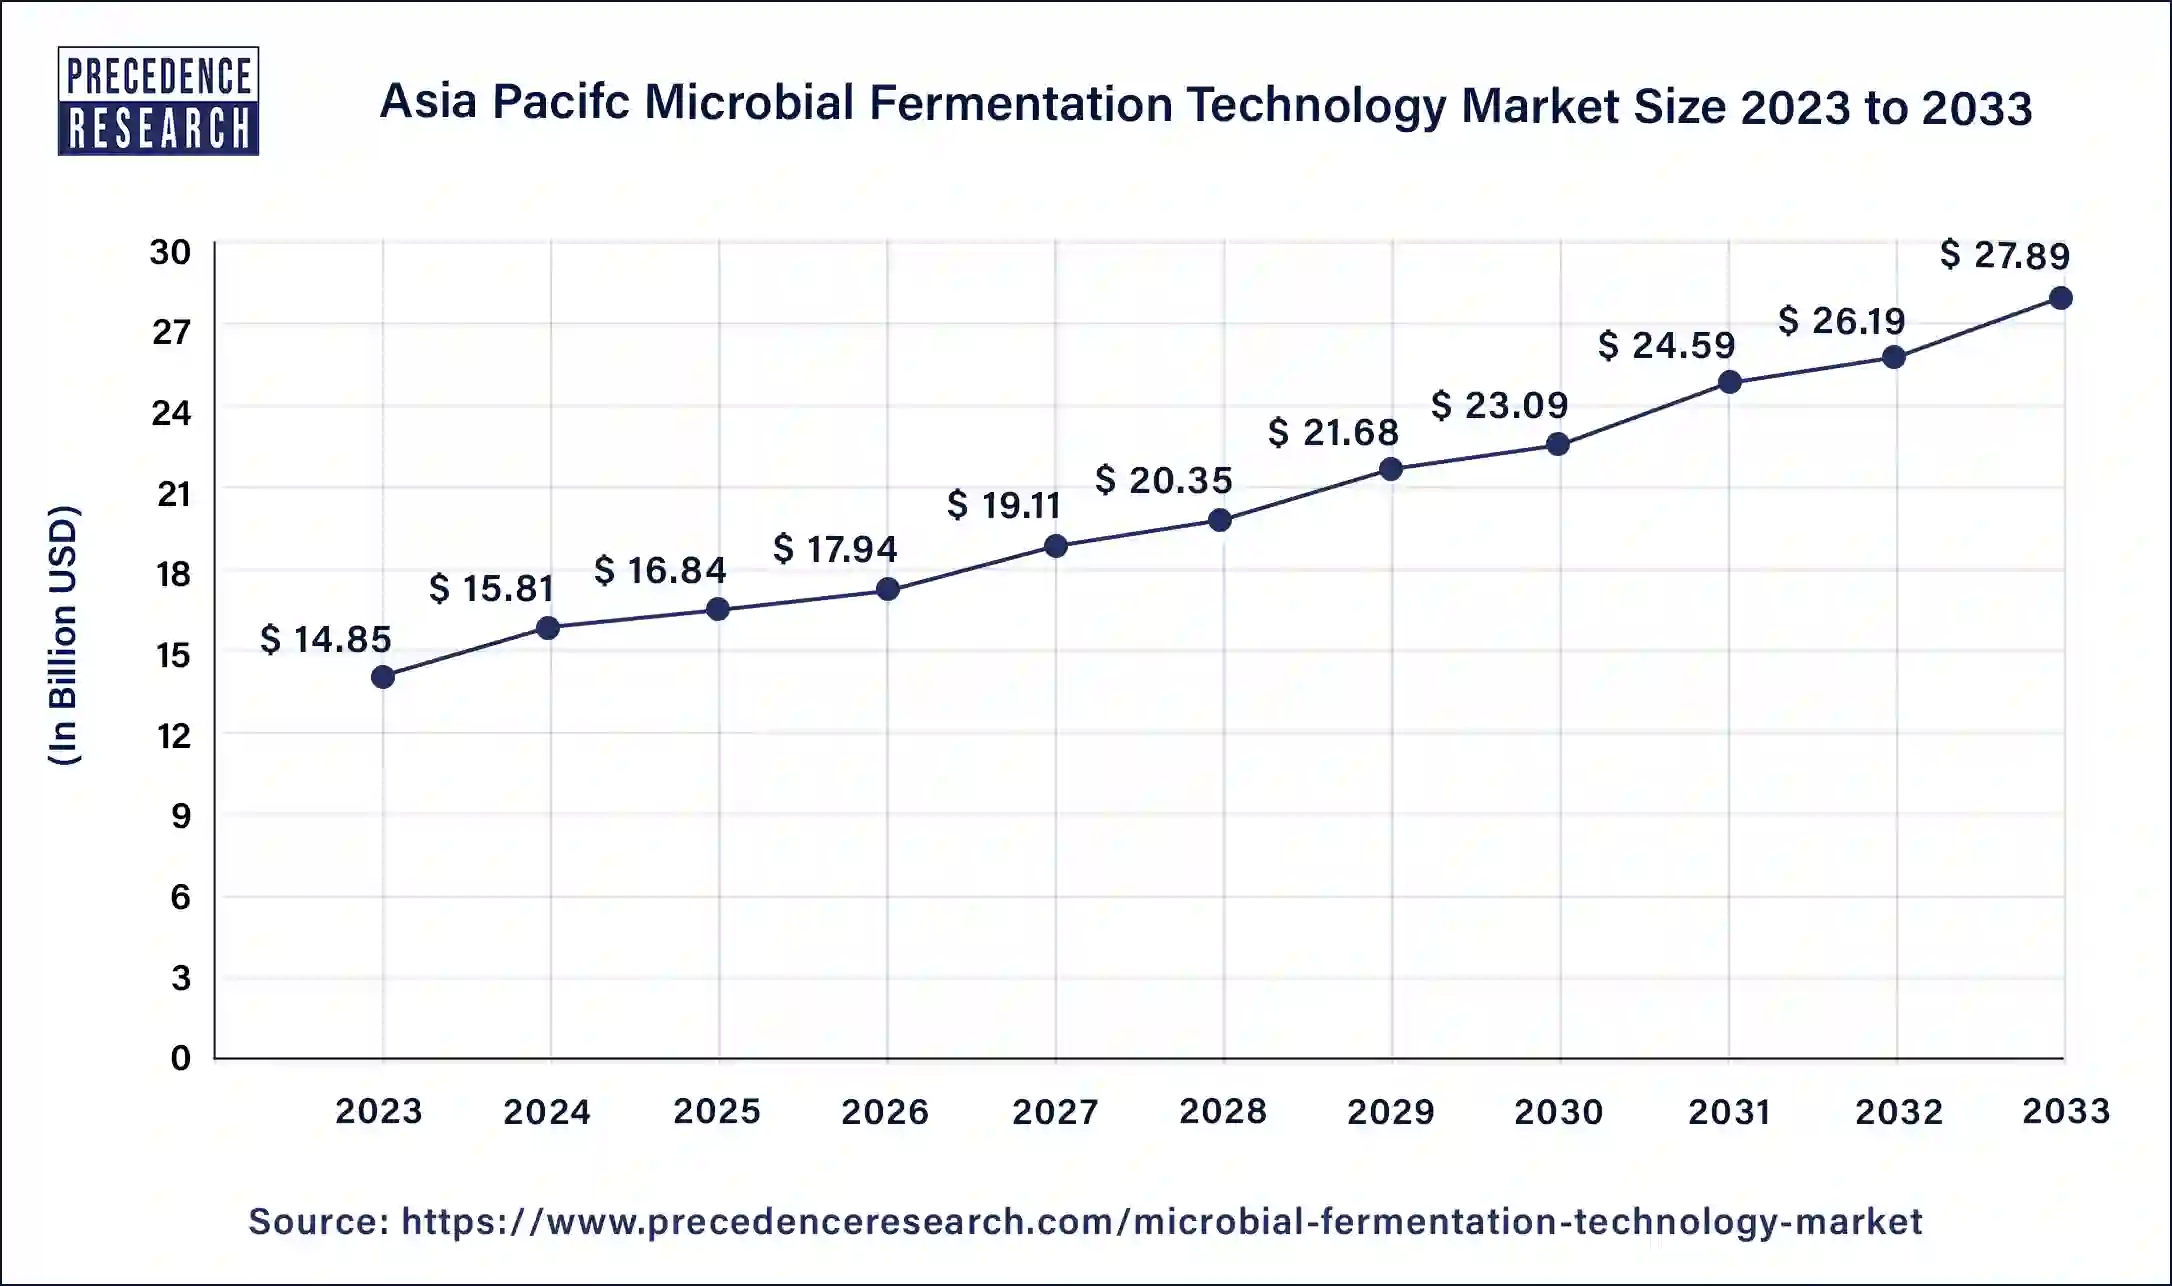 Asia Pacific Microbial Fermentation Technology Market Size 2024 to 2033